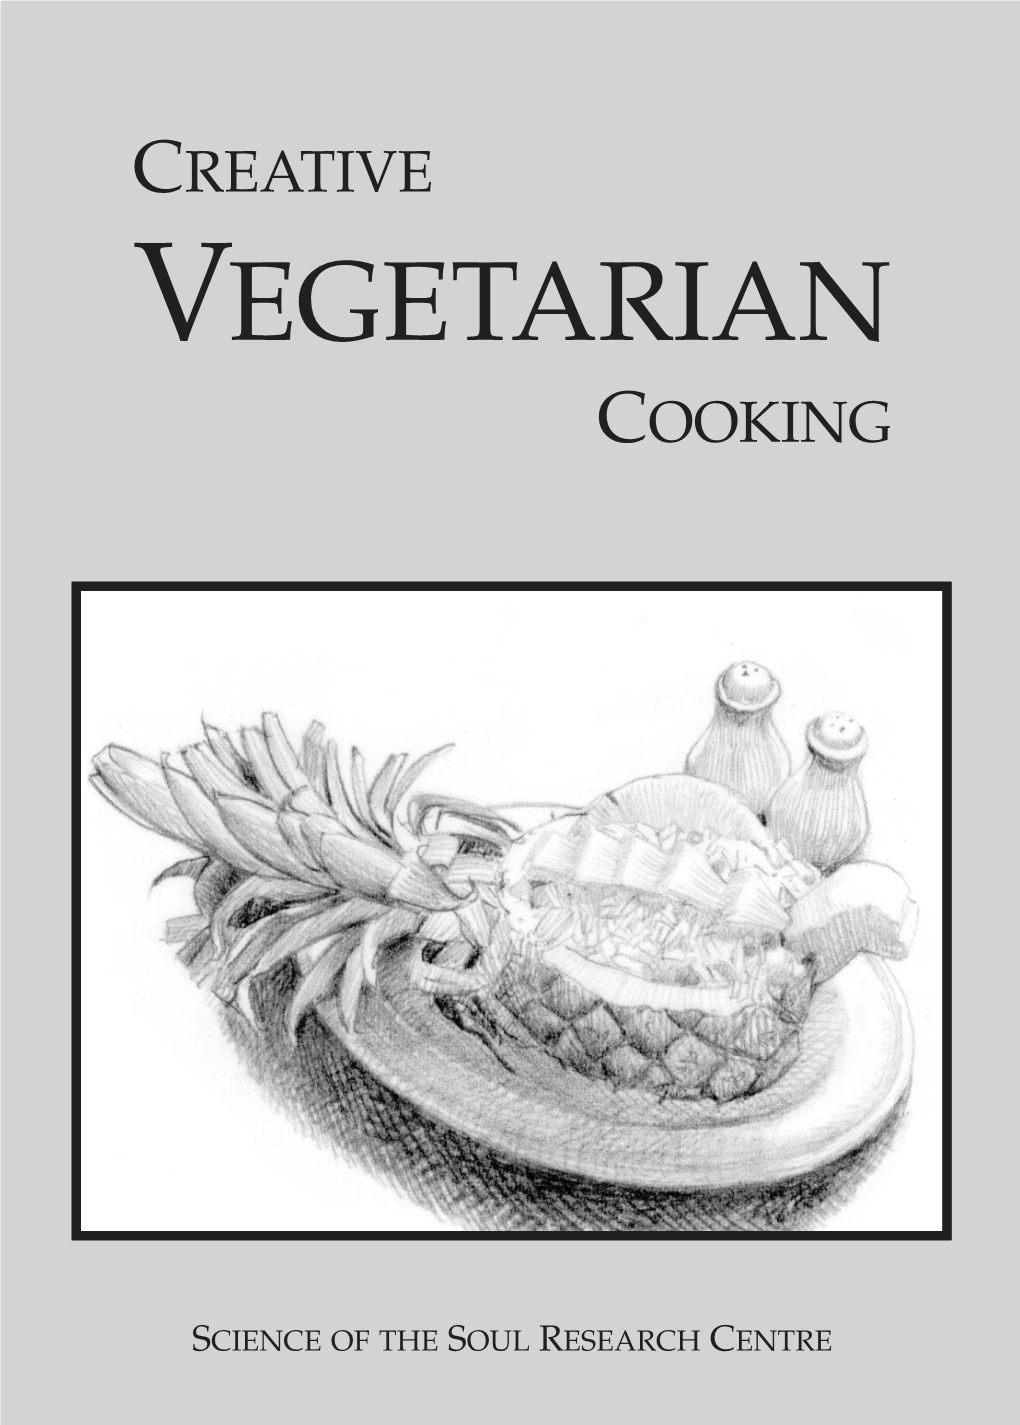 CREATIVE VEGETARIAN COOKING Published By: G